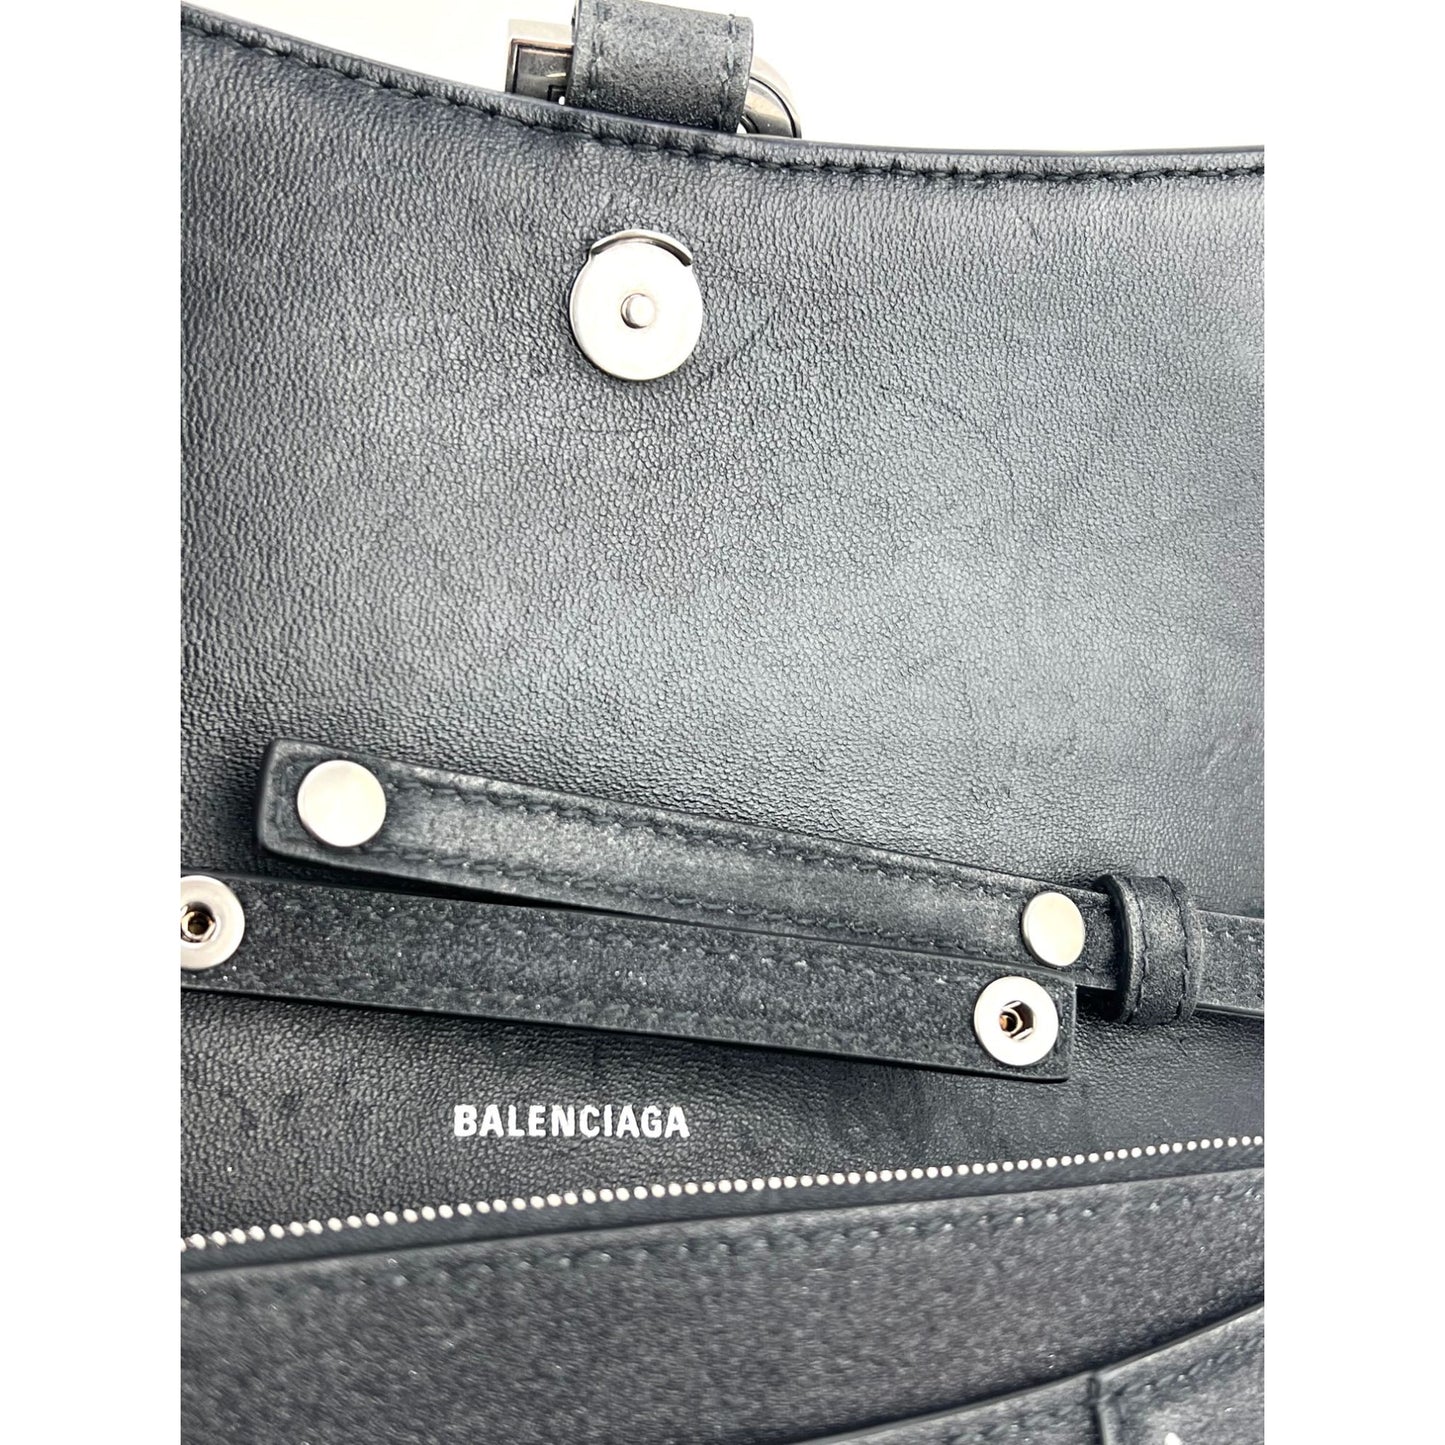 Hourglass Wallet on chain - Balenciaga - Leather - Black